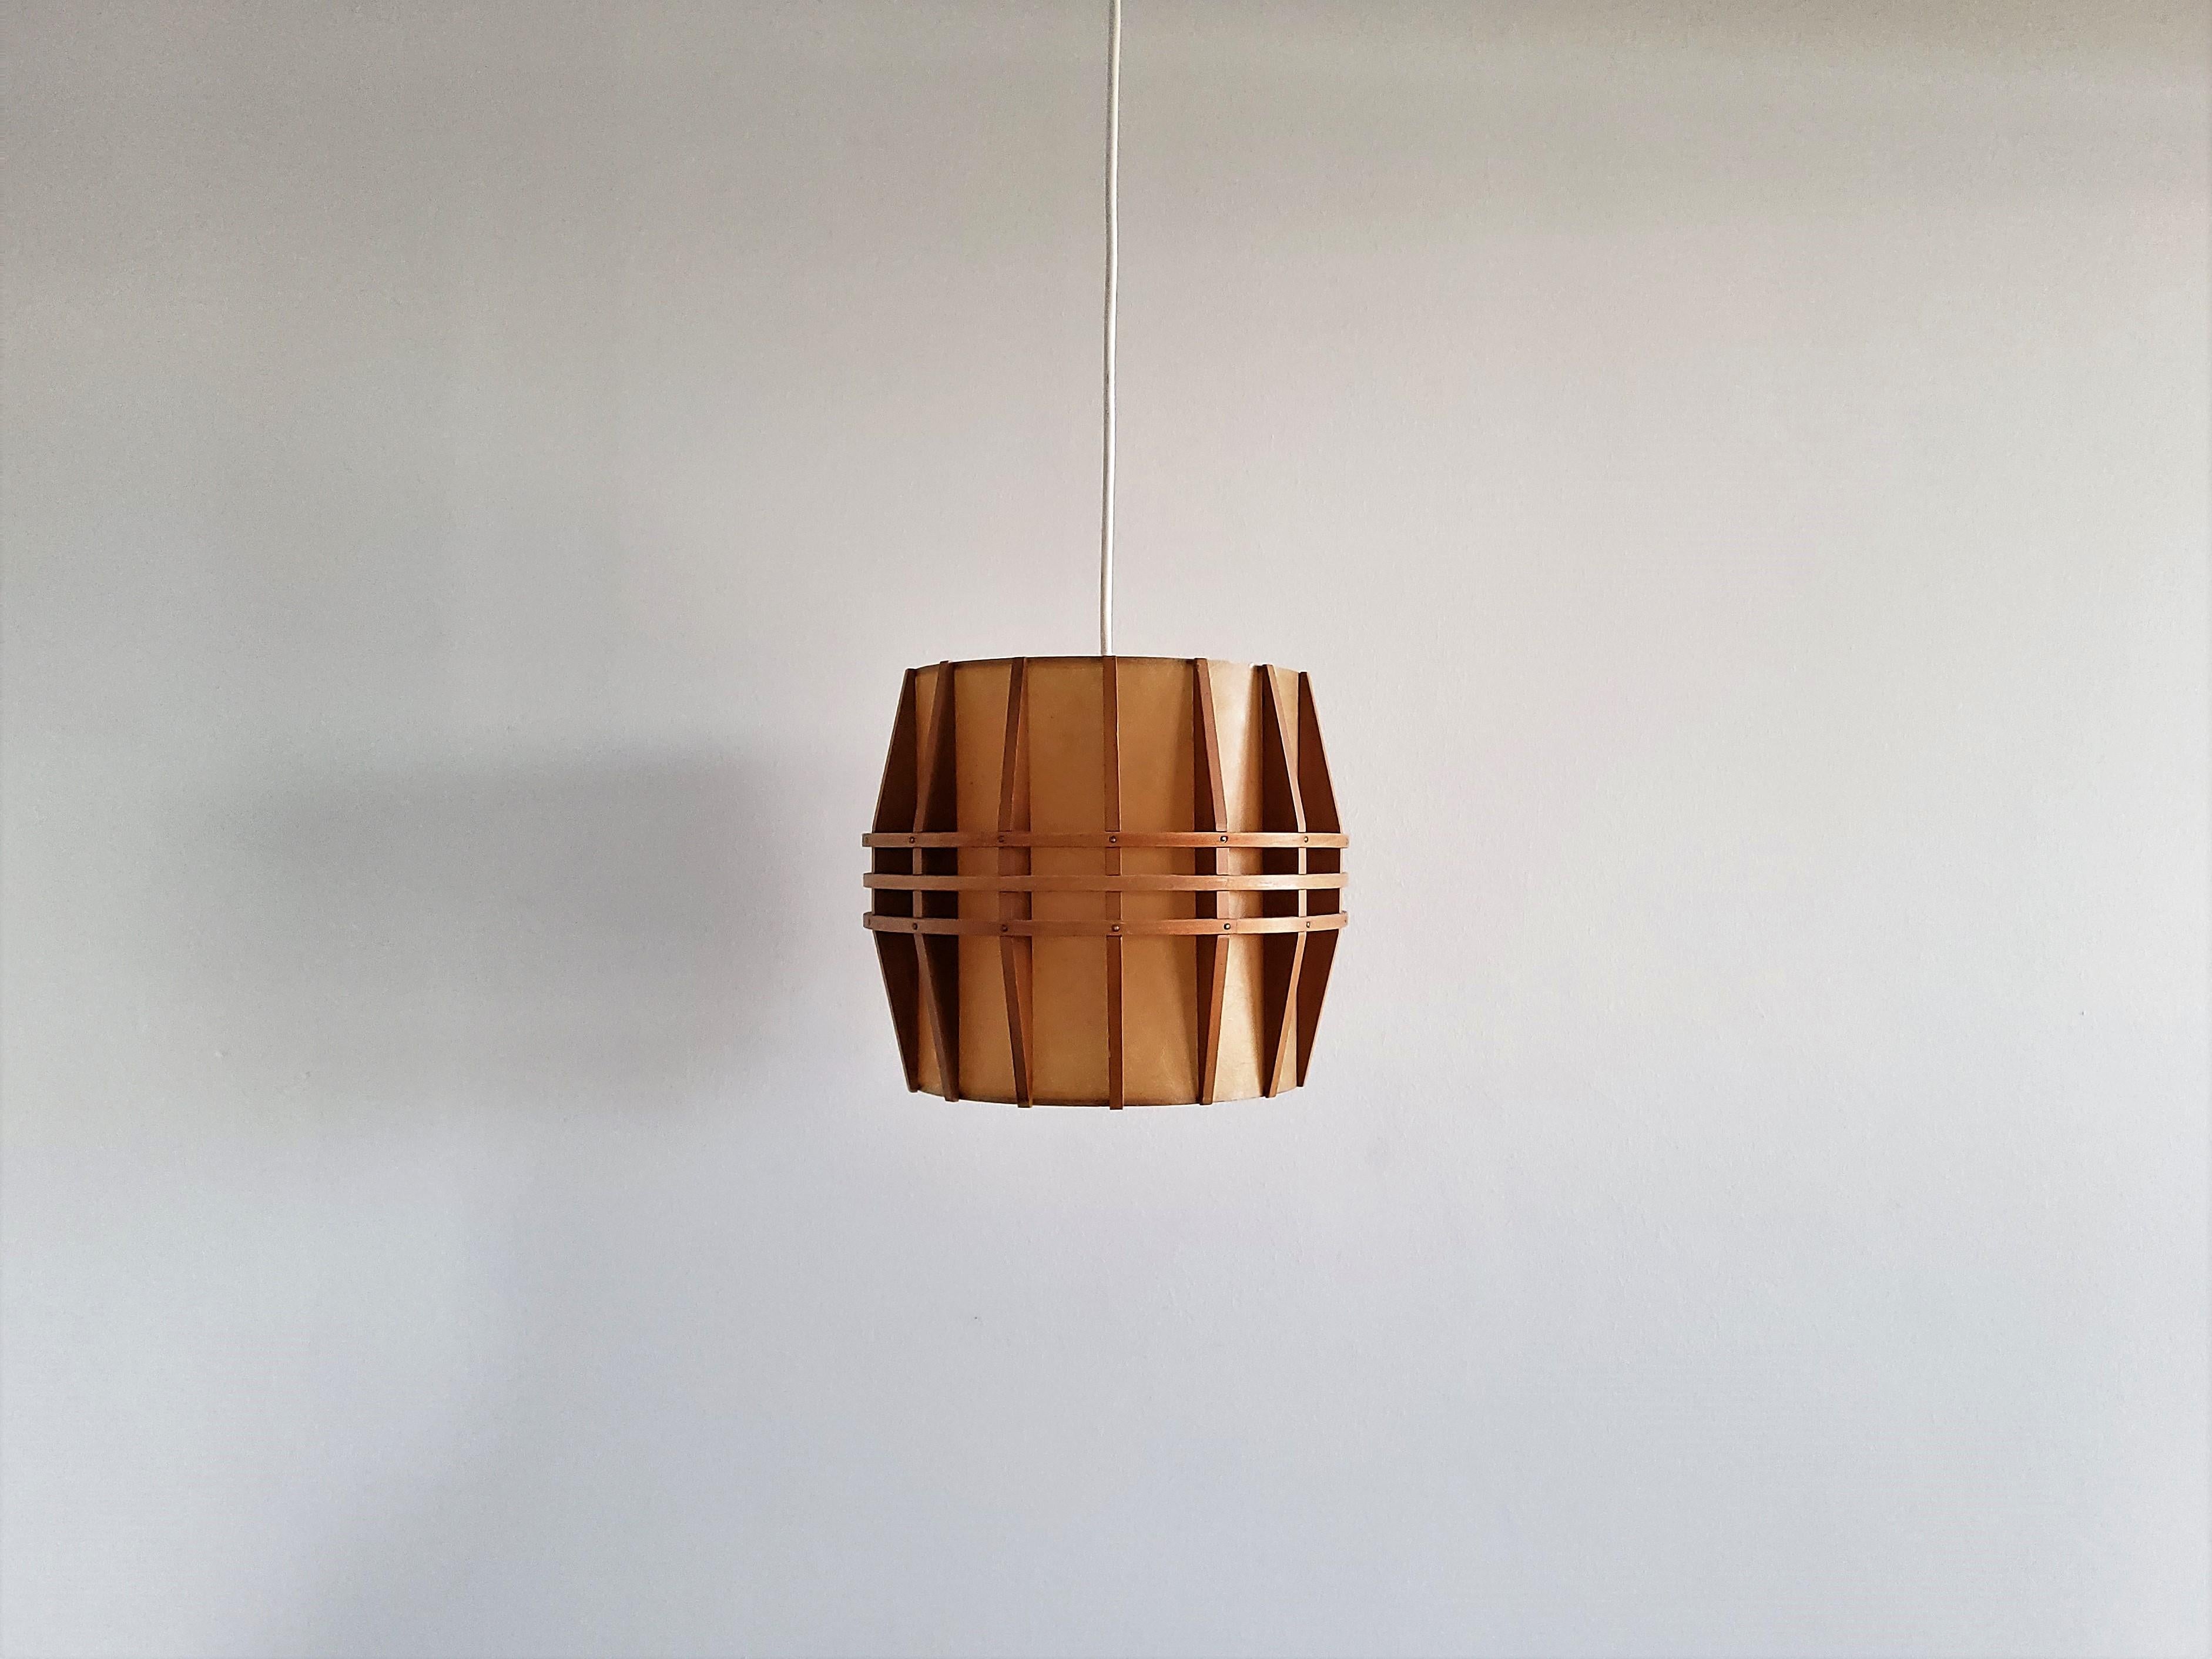 This is a very nice vintage pendant lamp from the 1960's, imported from Denmark. It has a cocoon shade, surrounded with small and narrow wooden slats. The design makes this lamp giving a nice warm and diffused light. All in a very good condition,